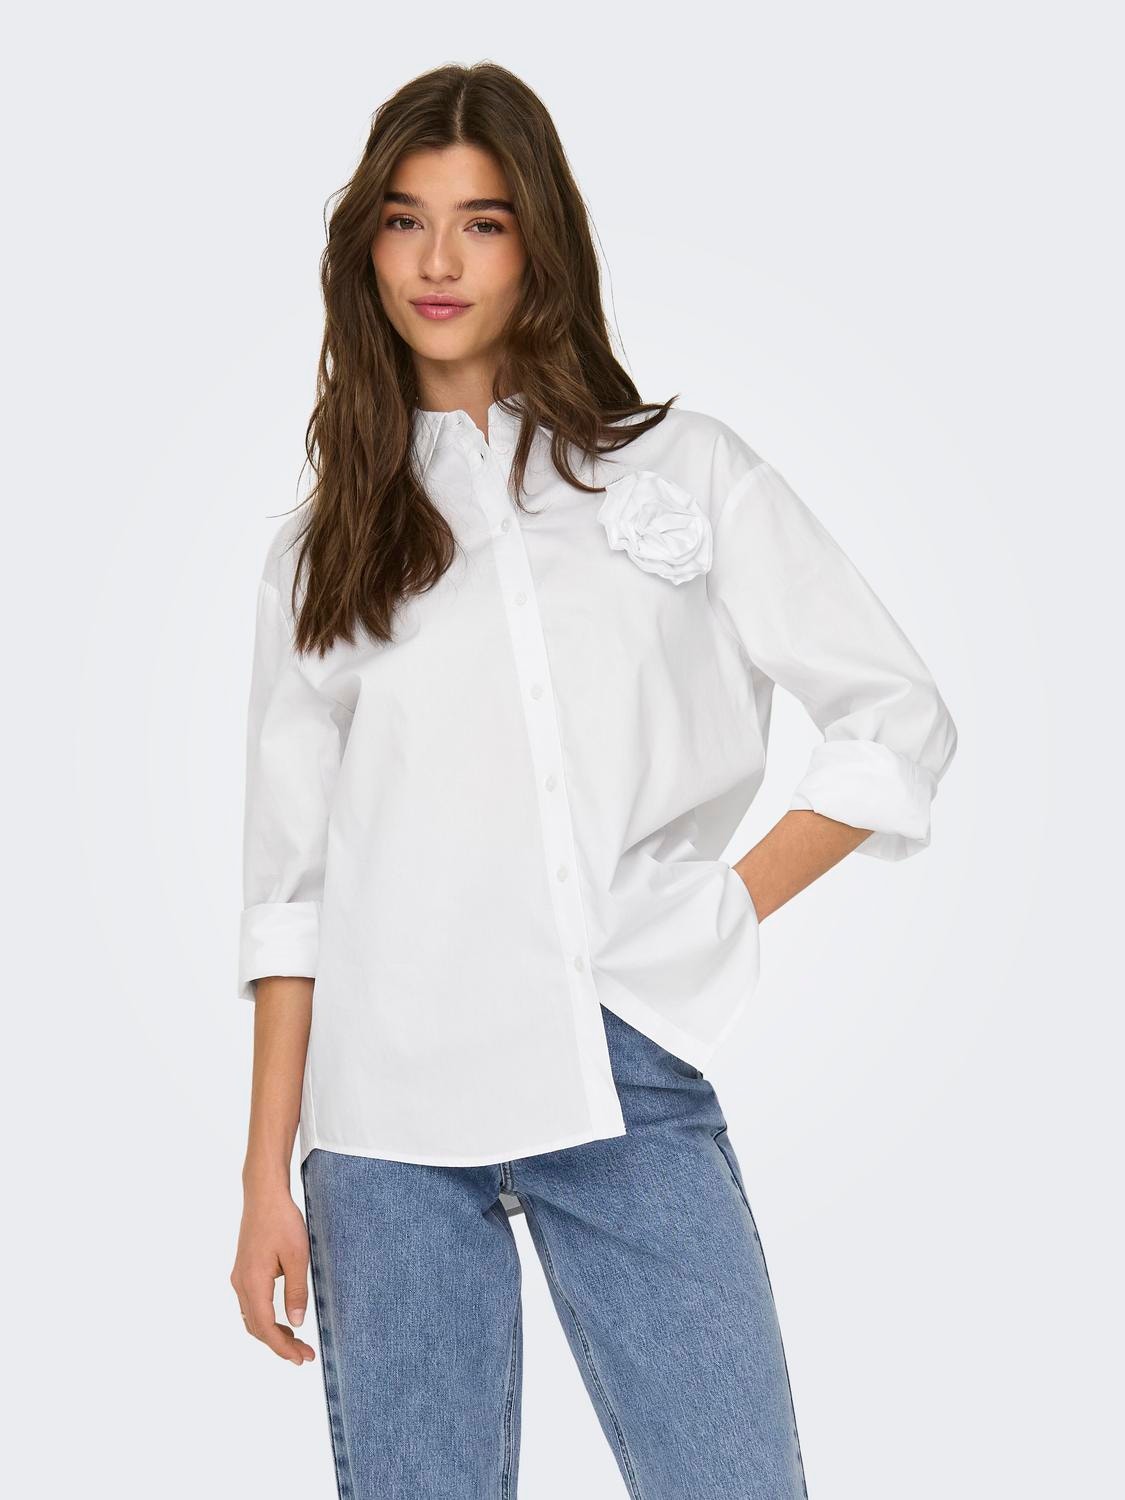 ONLY Shirt with rose detail -Cloud Dancer - 15319038